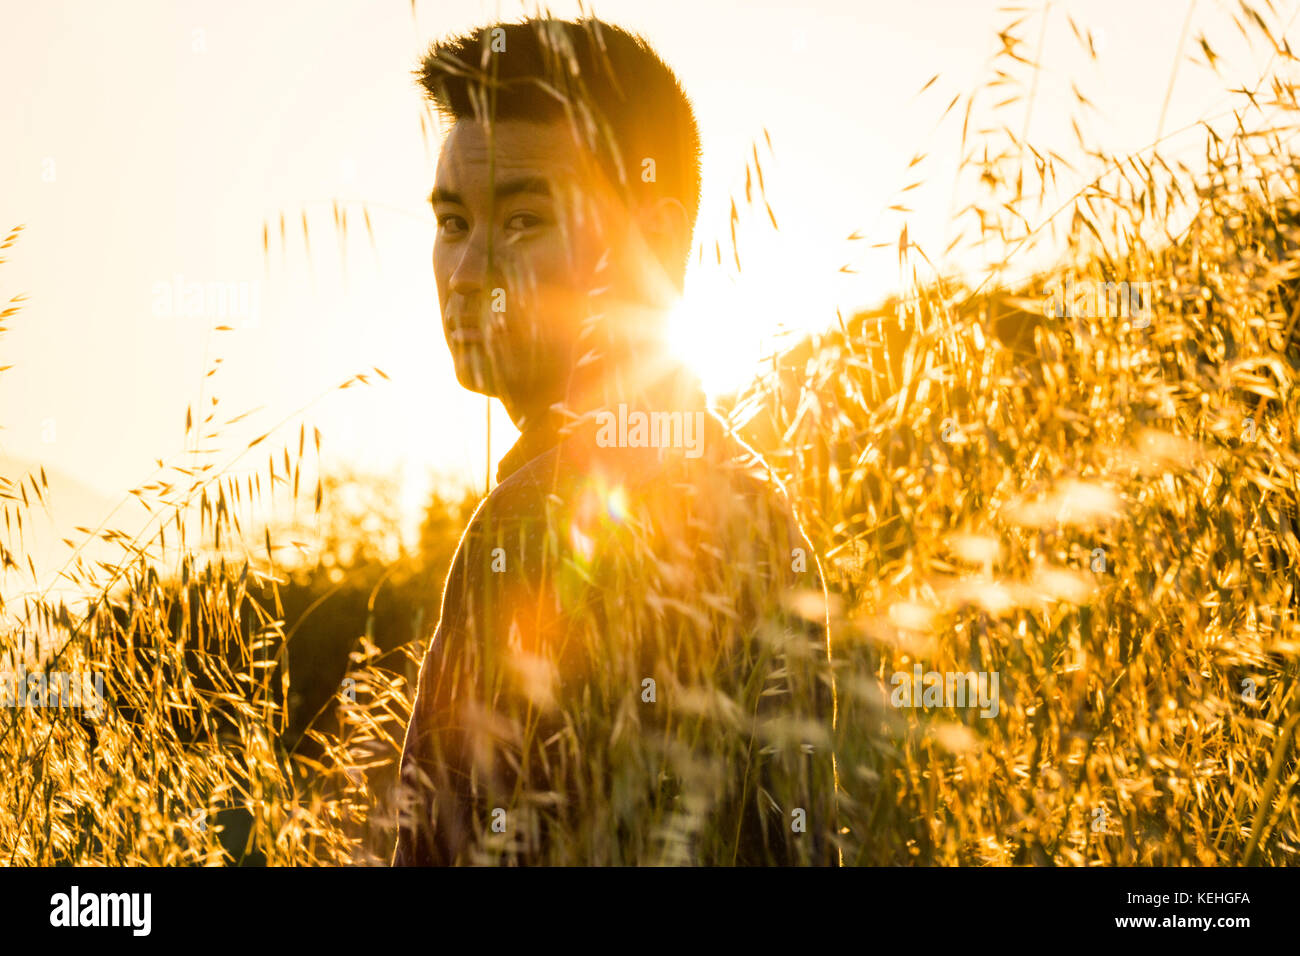 Serious Chinese man standing in field of wheat Stock Photo